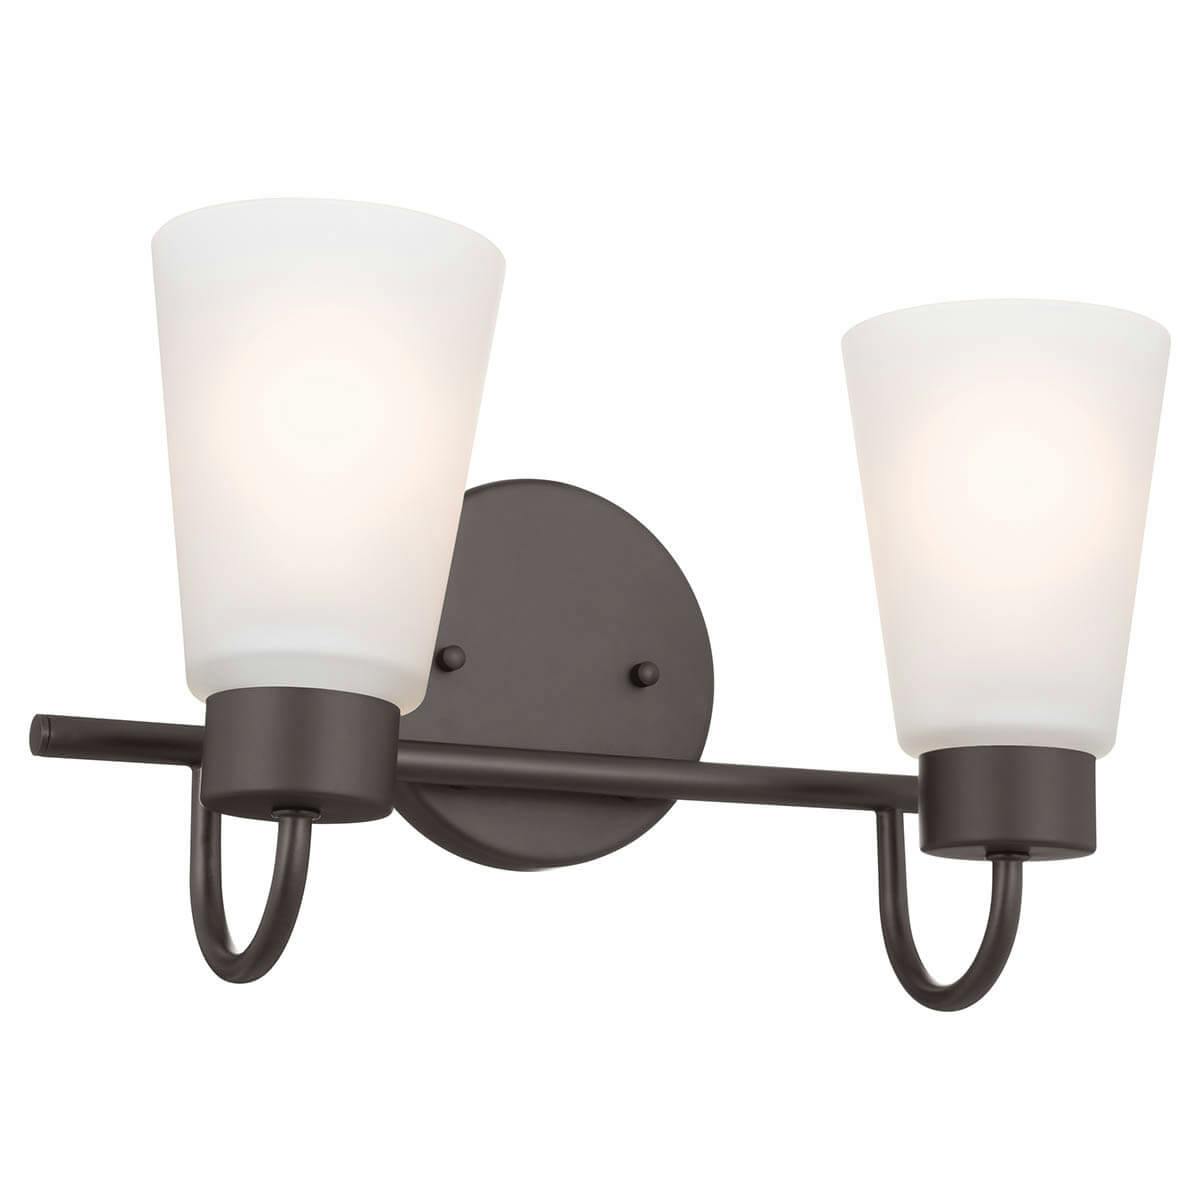 The Erma 14"  Vanity Light Olde Bronze facing up on a white background